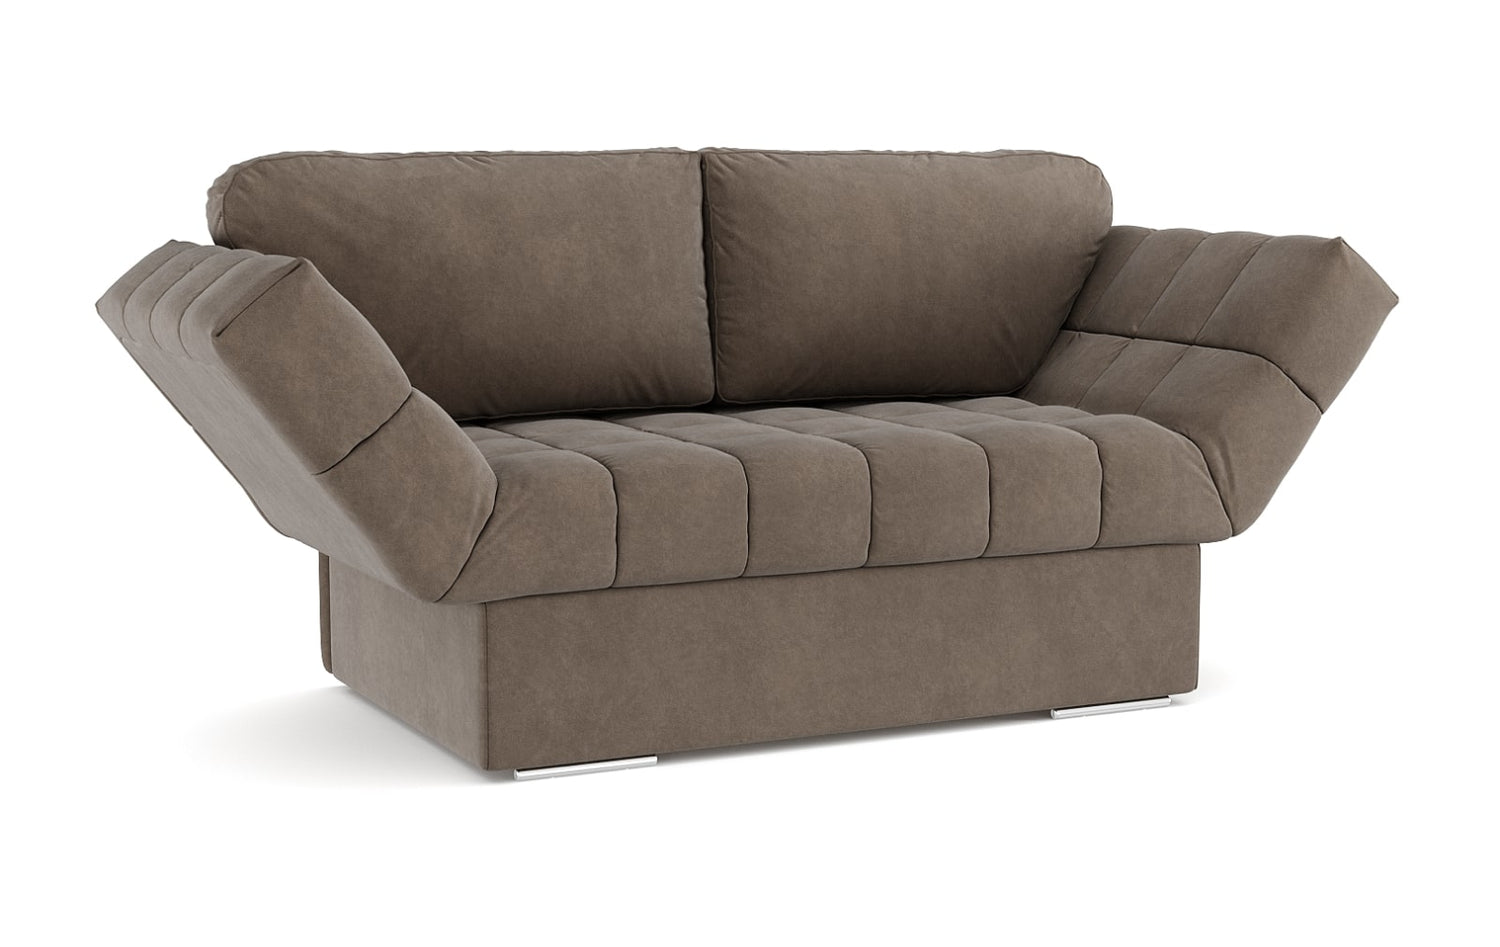 Lily Sofa Bed